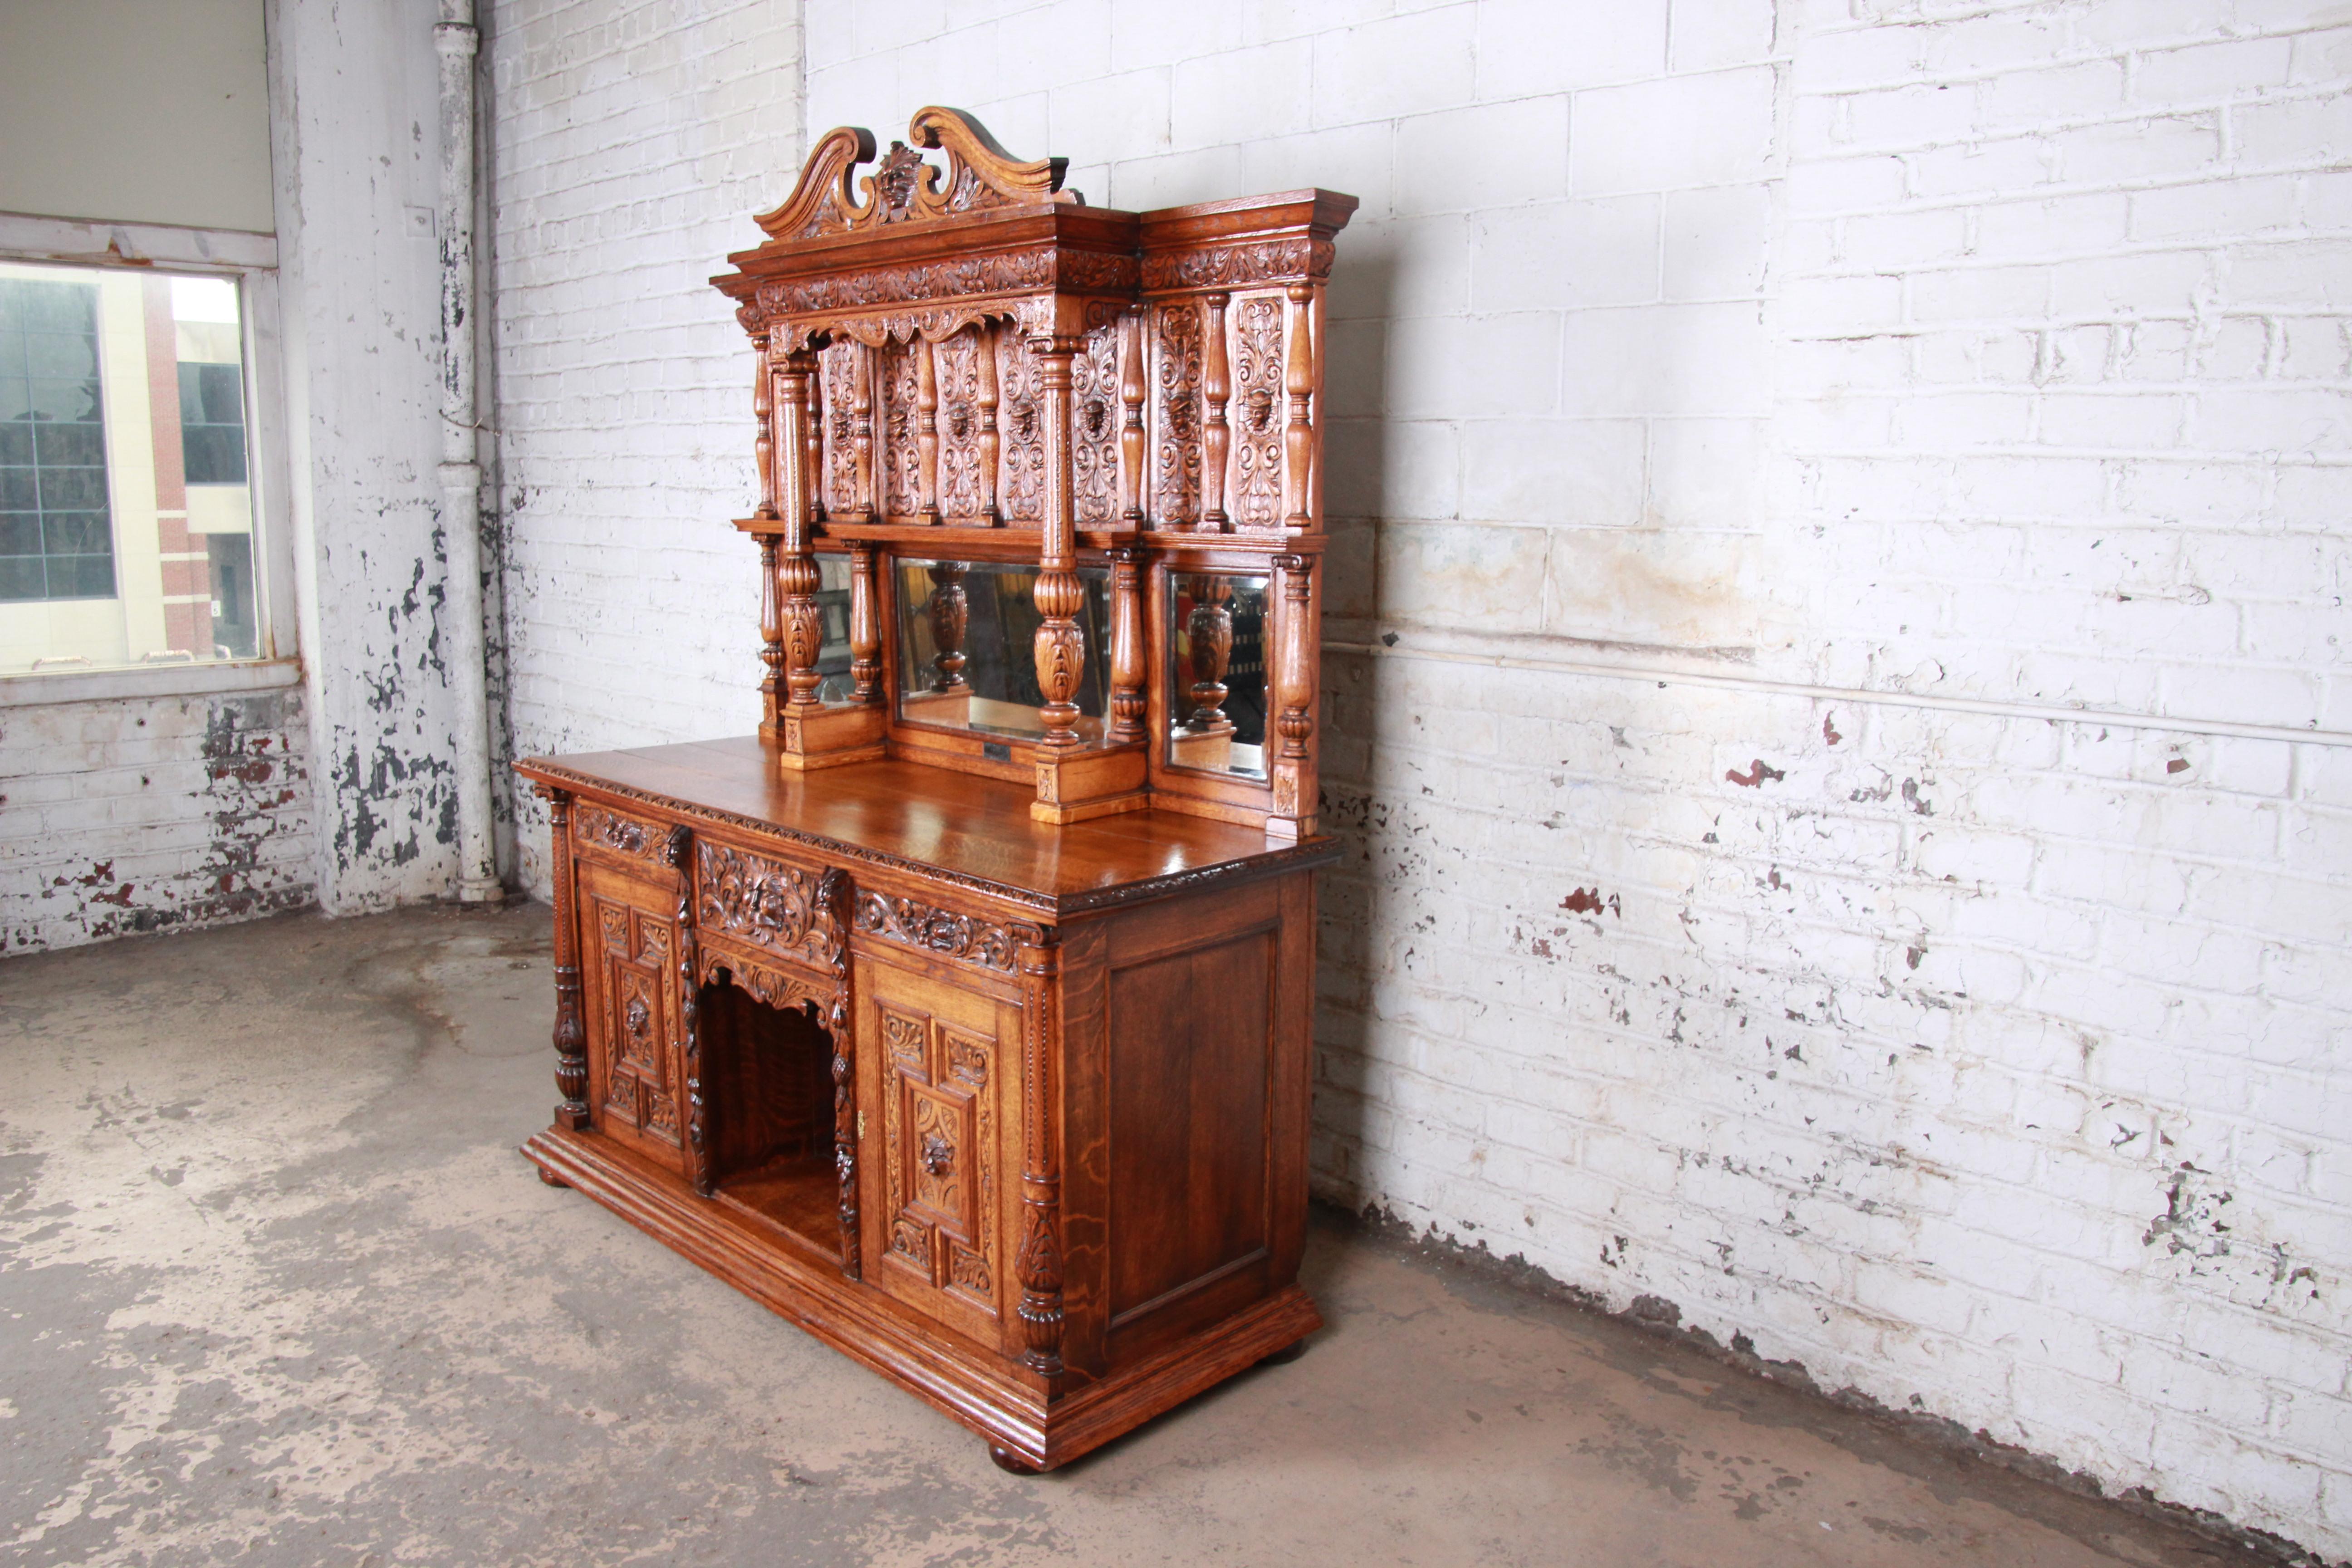 An exceptional antique ornate carved oak sideboard cabinet or back bar

circa 1880s

Oak and mirror

Measures: 72.5